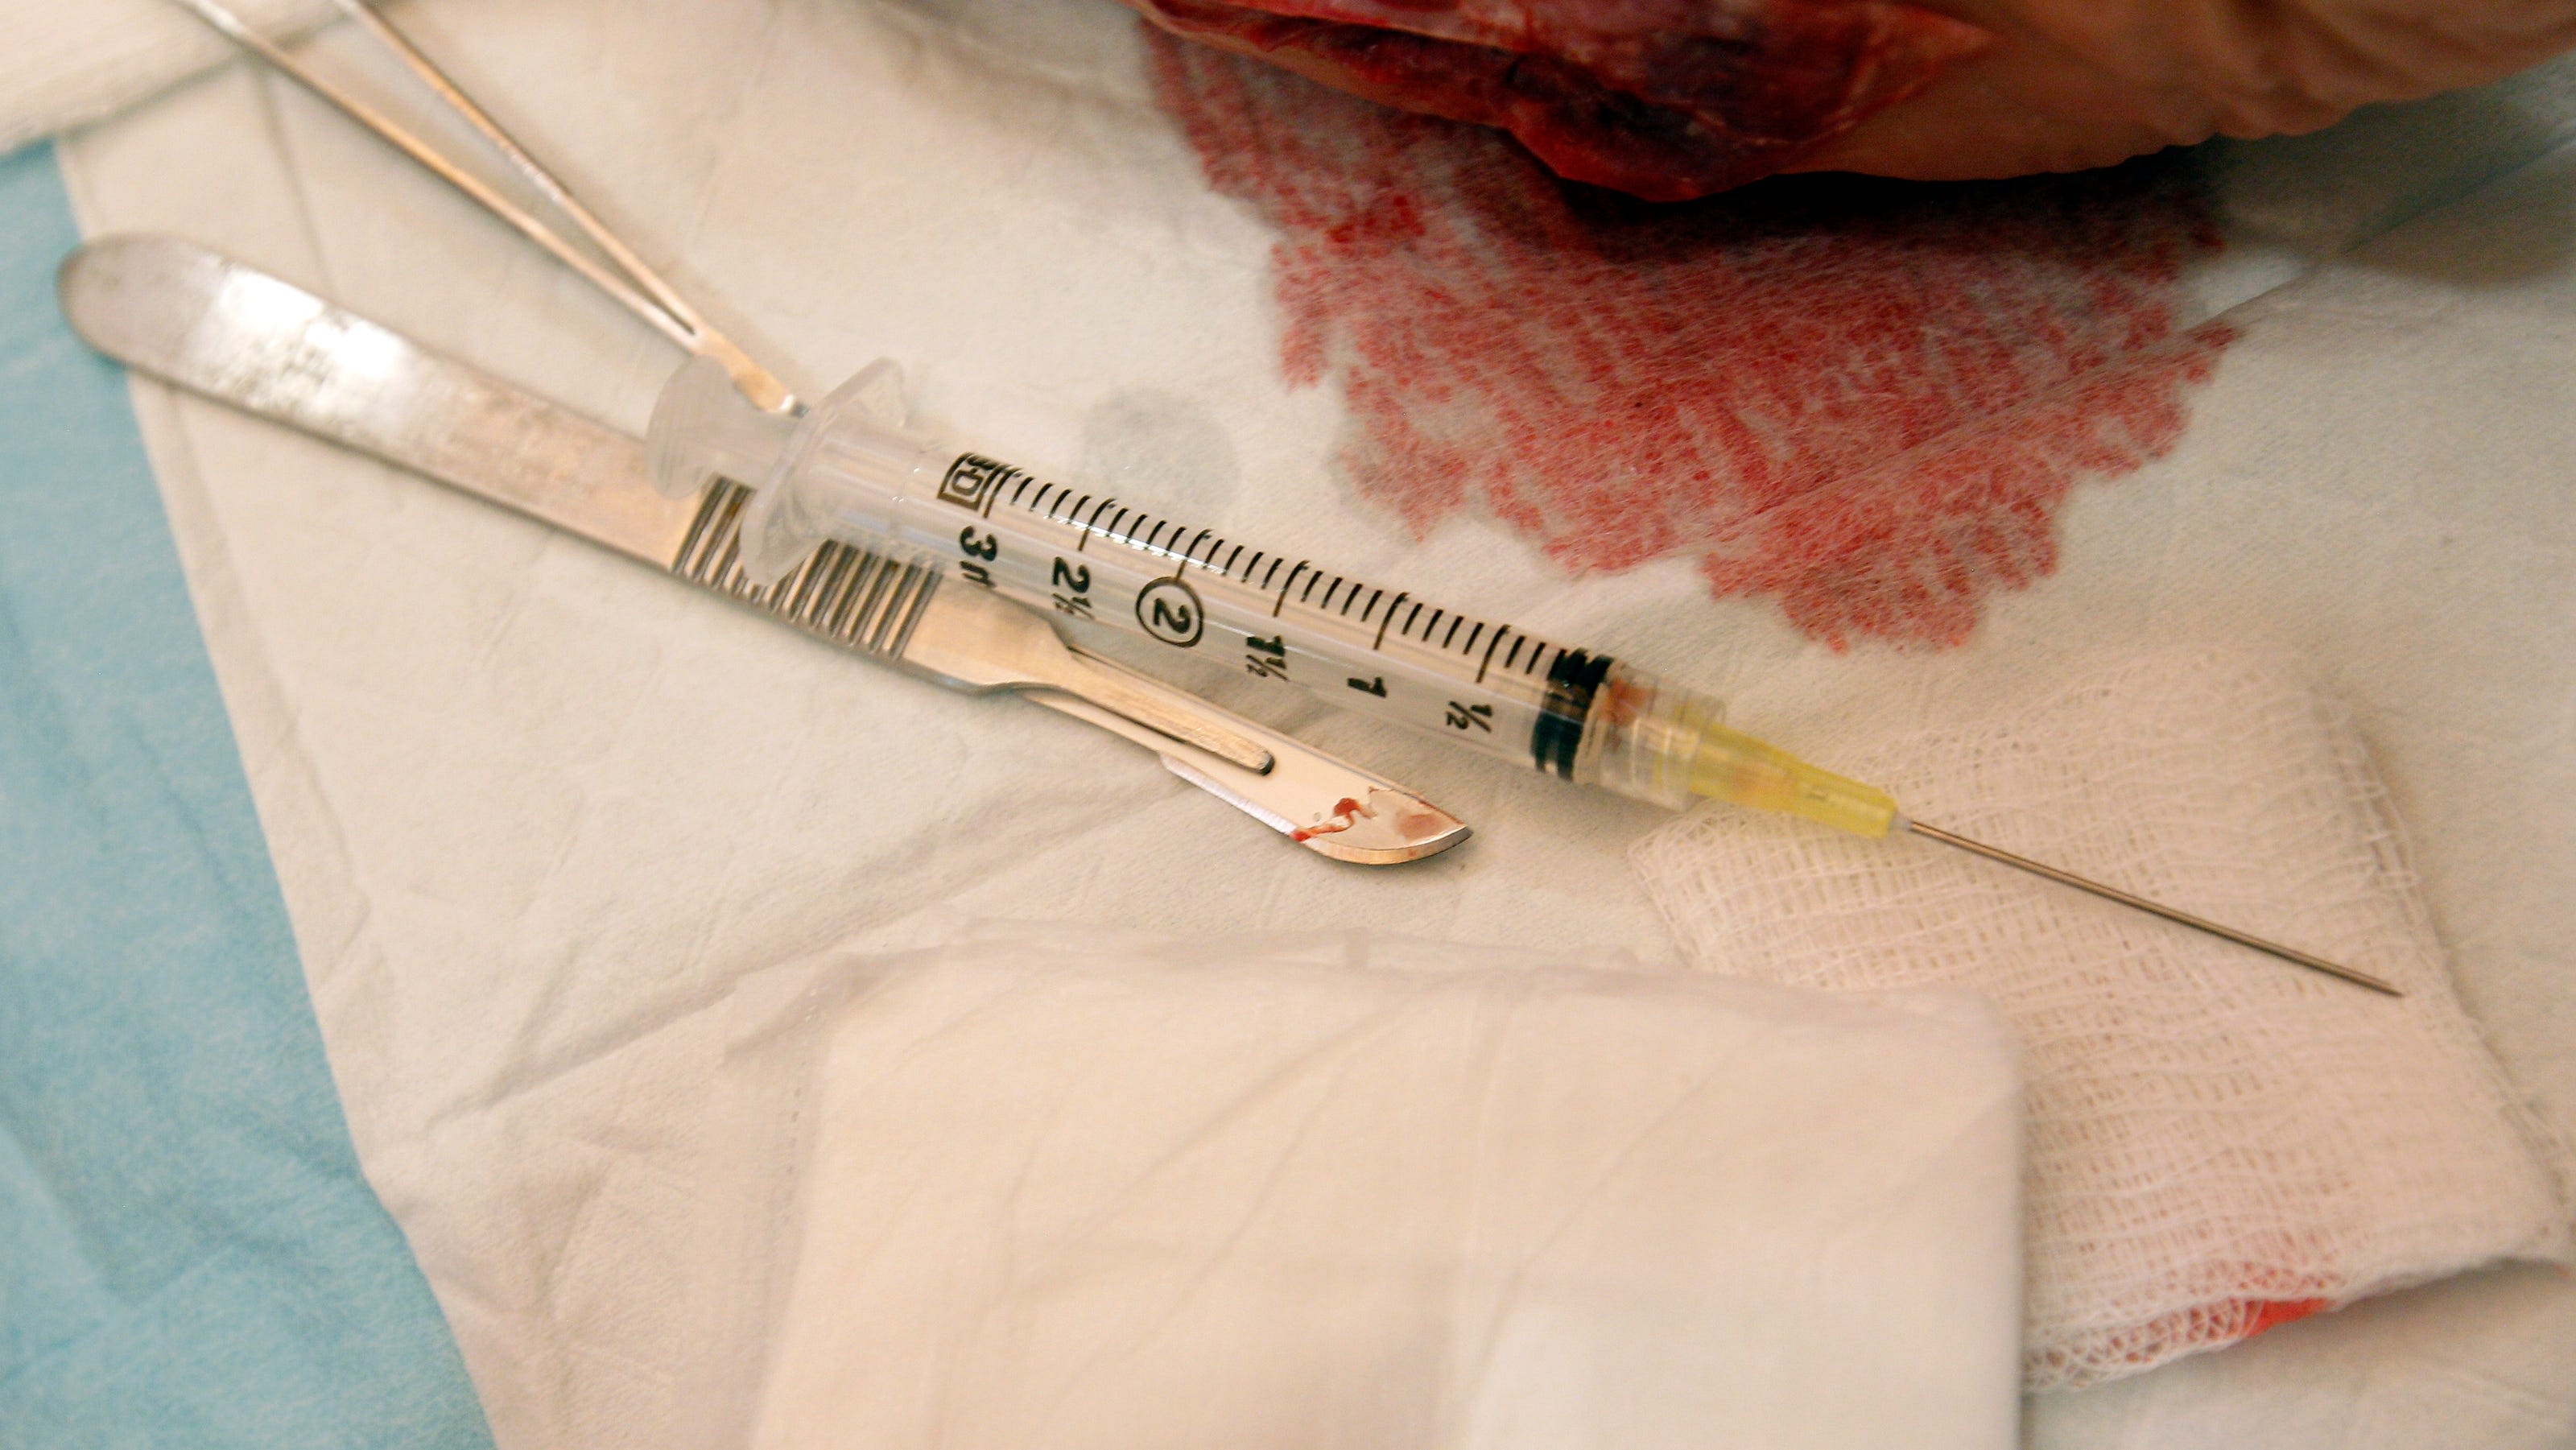 Stem cell injections in Mexico can be hazardous. Report identifies US victims.